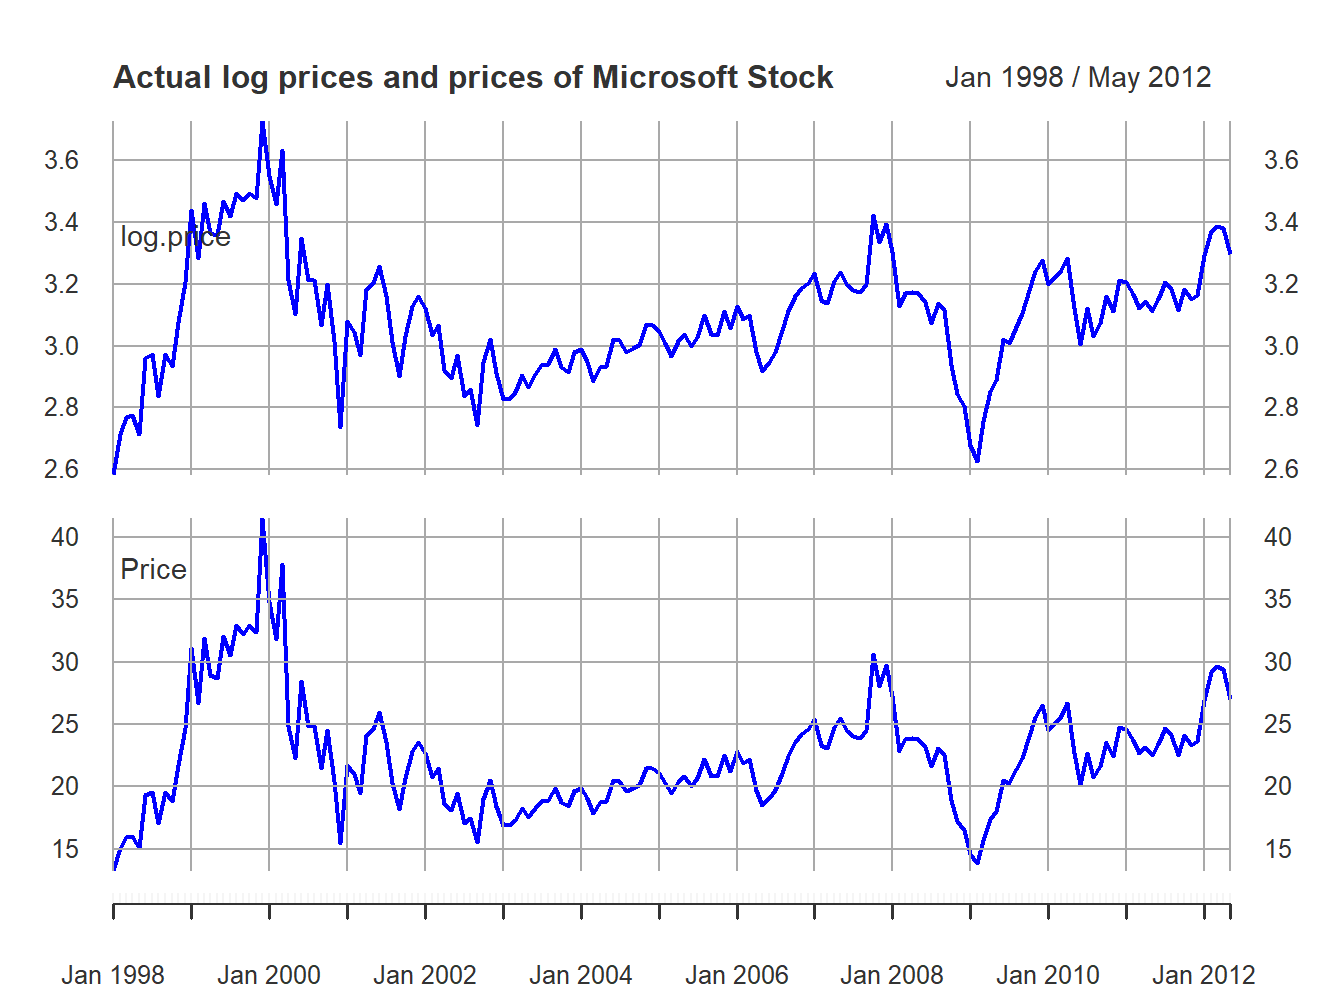 Top panel: Actual log monthly prices of Microsoft. Bottom panel: Actual monthly prices of Microsoft stock.